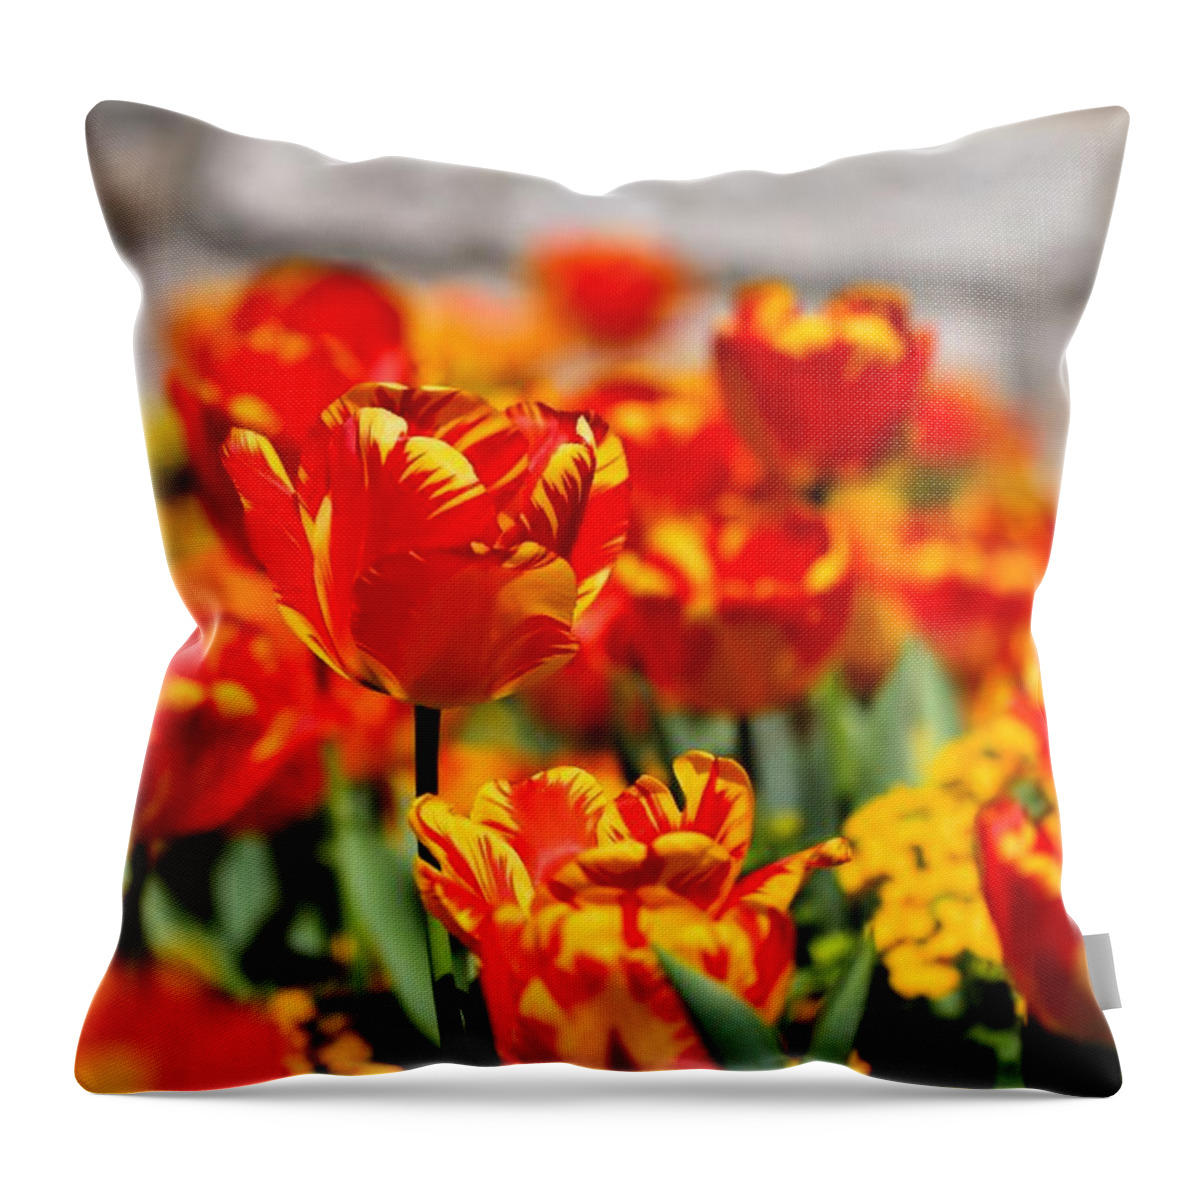 Tulips Throw Pillow featuring the photograph Flame Garden by Katherine White